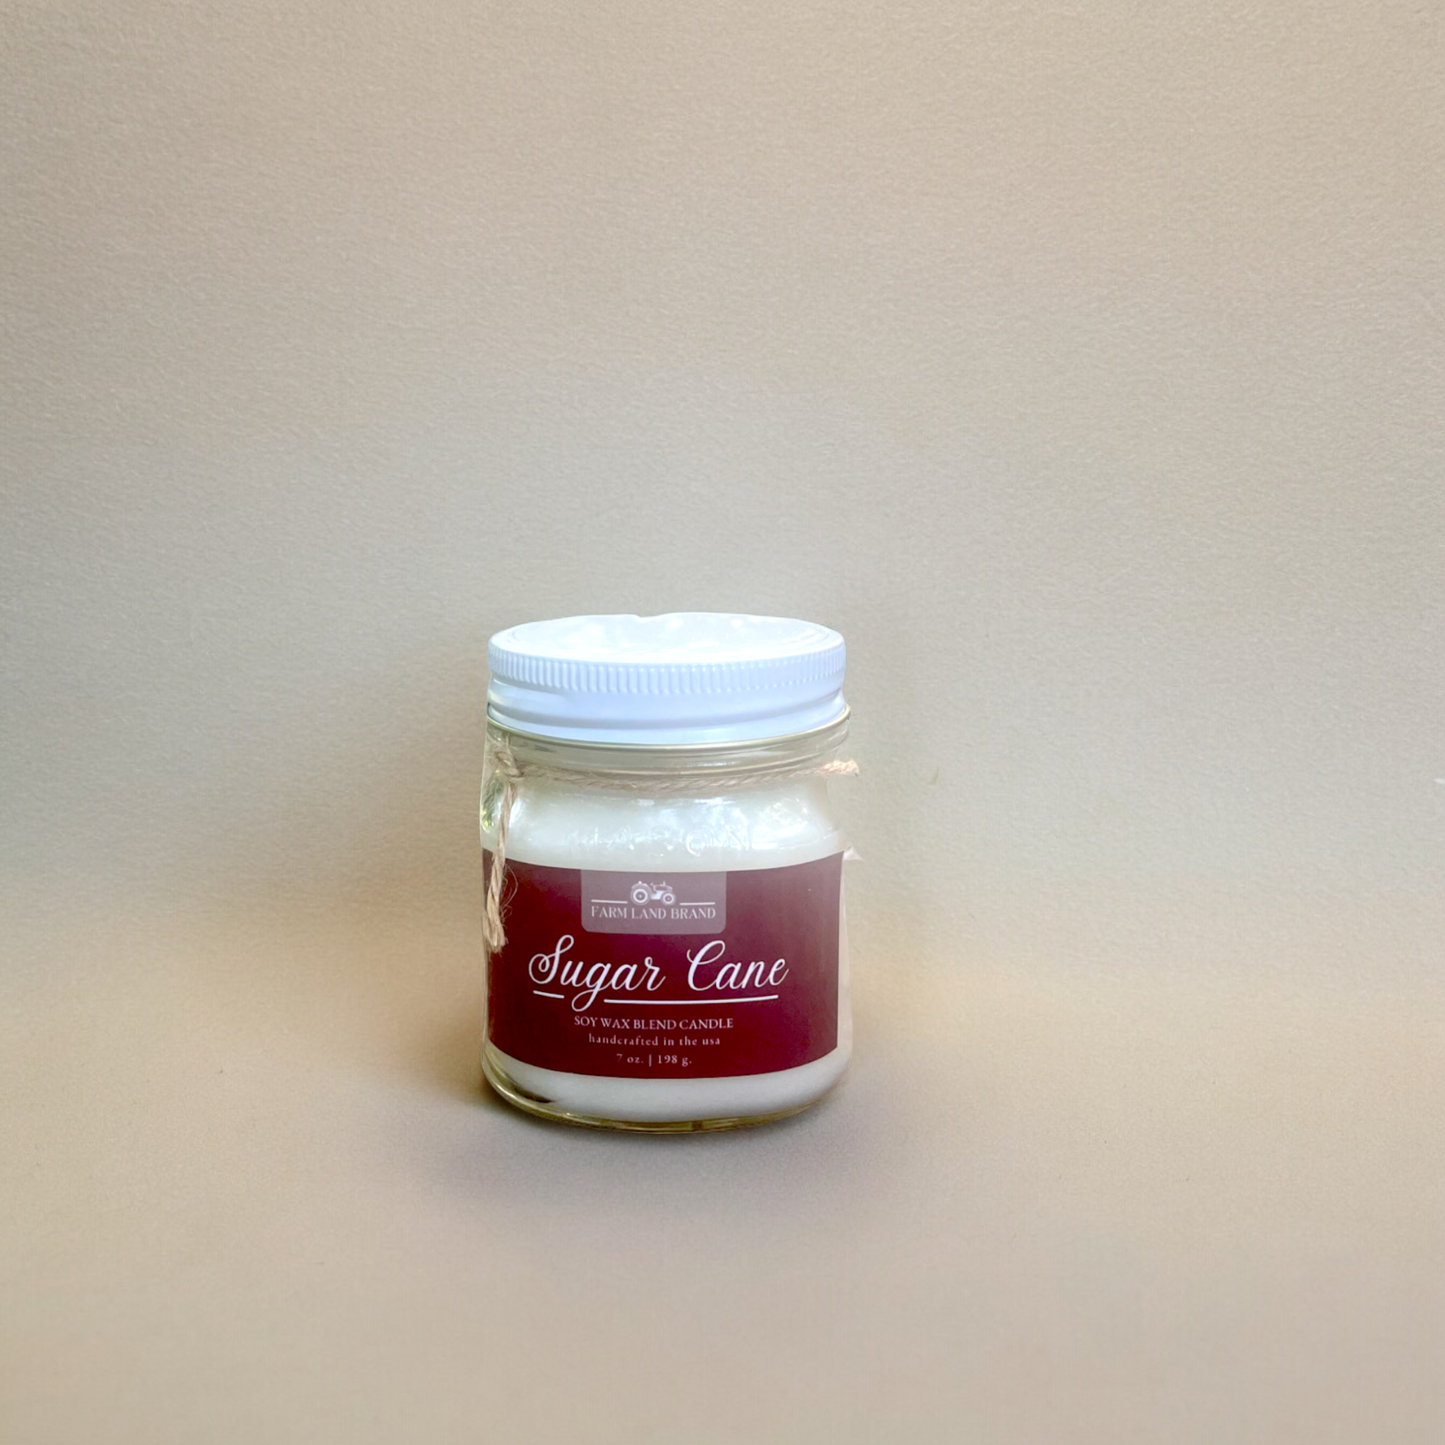 Sugar Cane Soy Wax Mason Jar Candle   Scented with Pineapple and Sugar